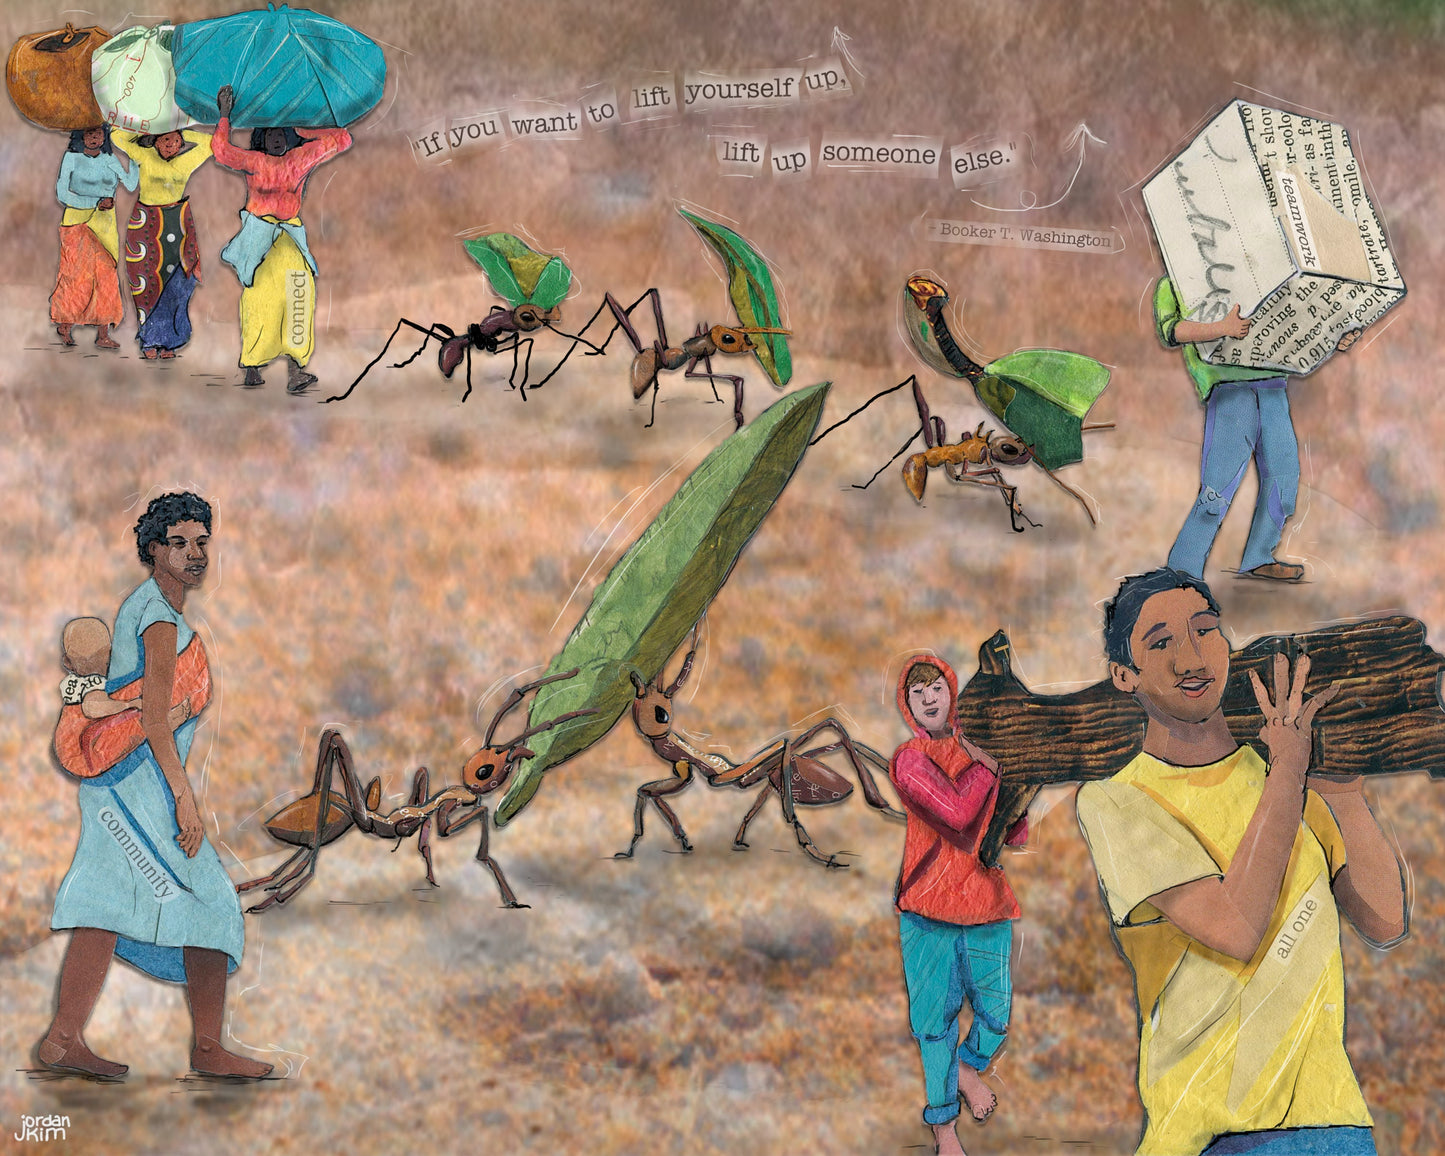 8x10 Art Print of a mixed media collage of people and ants carrying things together, connected, support, Booker t. Washington quote